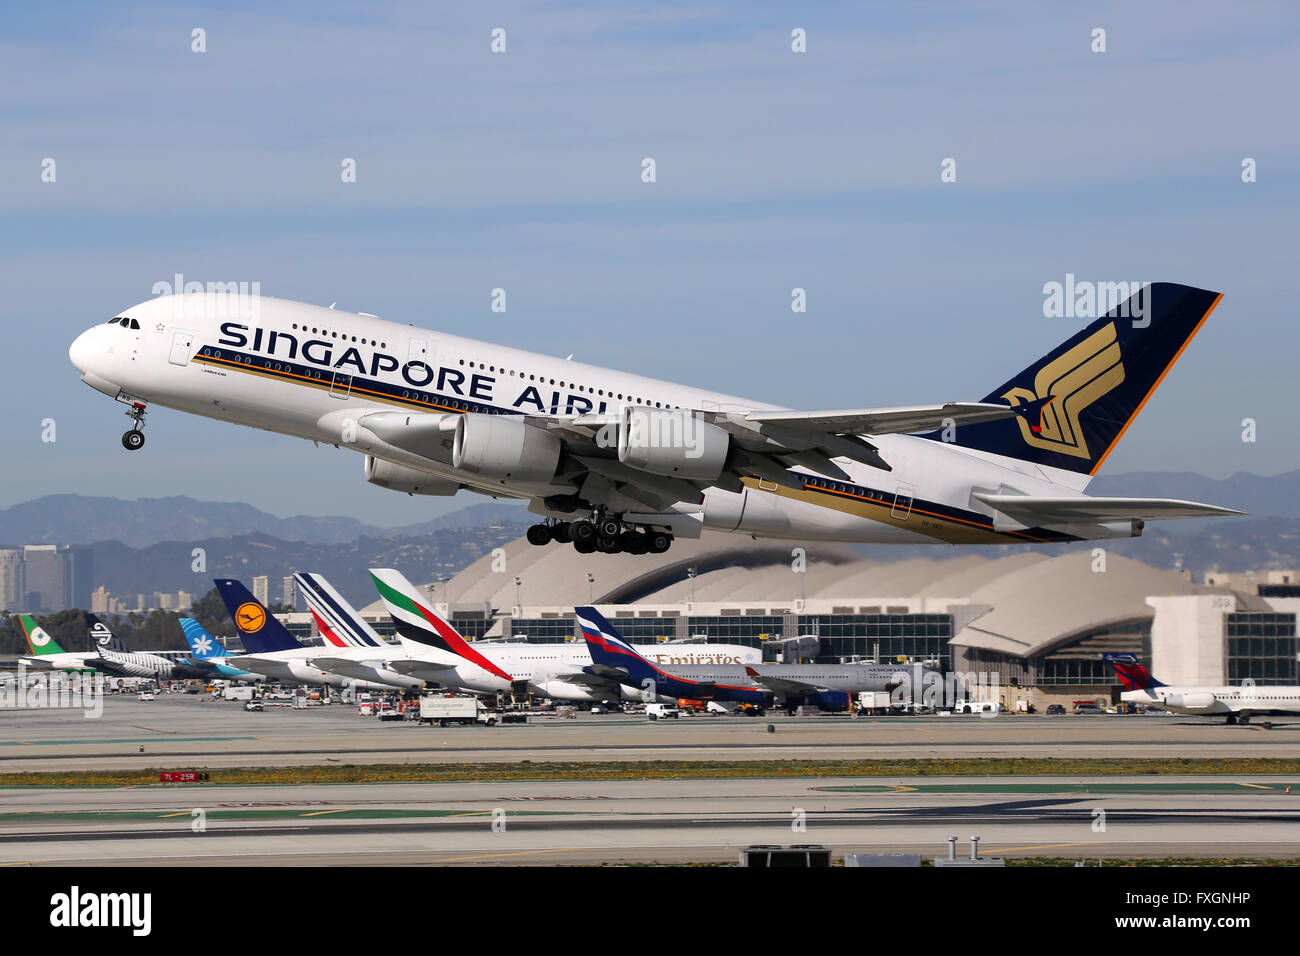 Los Angeles, USA - February 22, 2016: A Singapore Airlines Airbus A380 with the registration 9V-SKS taking off at Los Angeles In Stock Photo